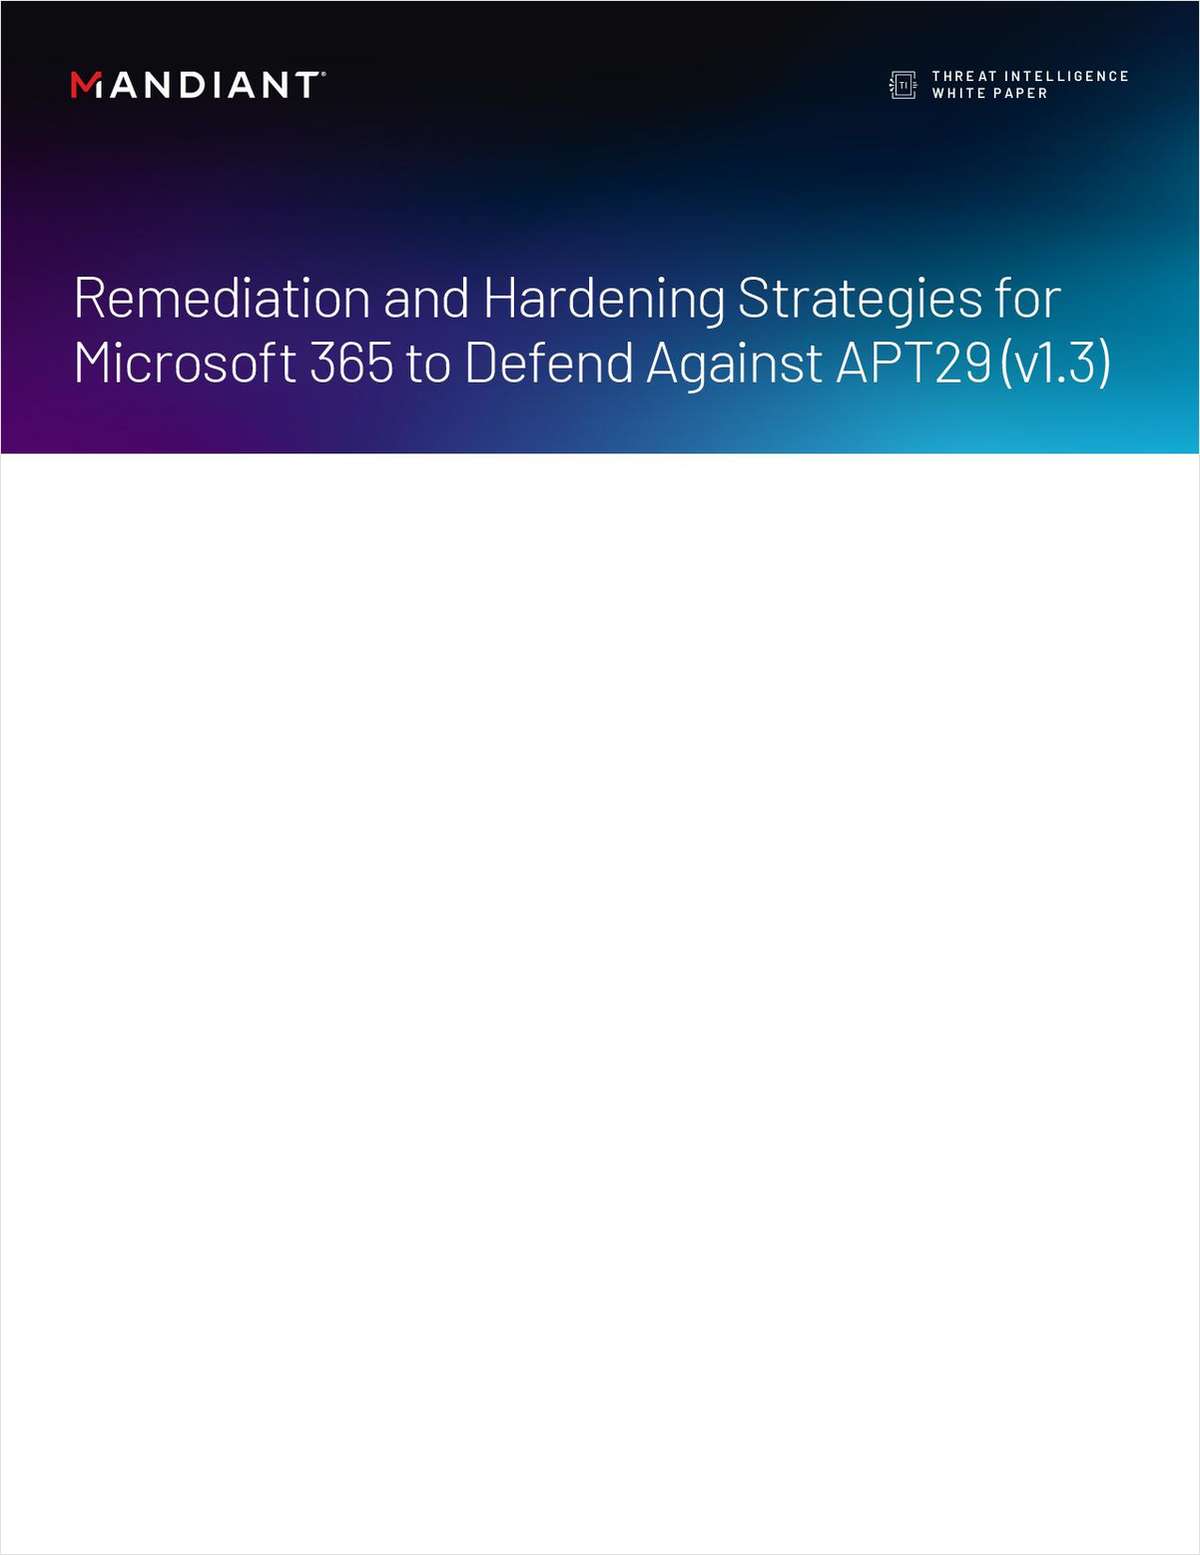 Remediation and Hardening Strategies for Microsoft 365 to Defend Against APT29